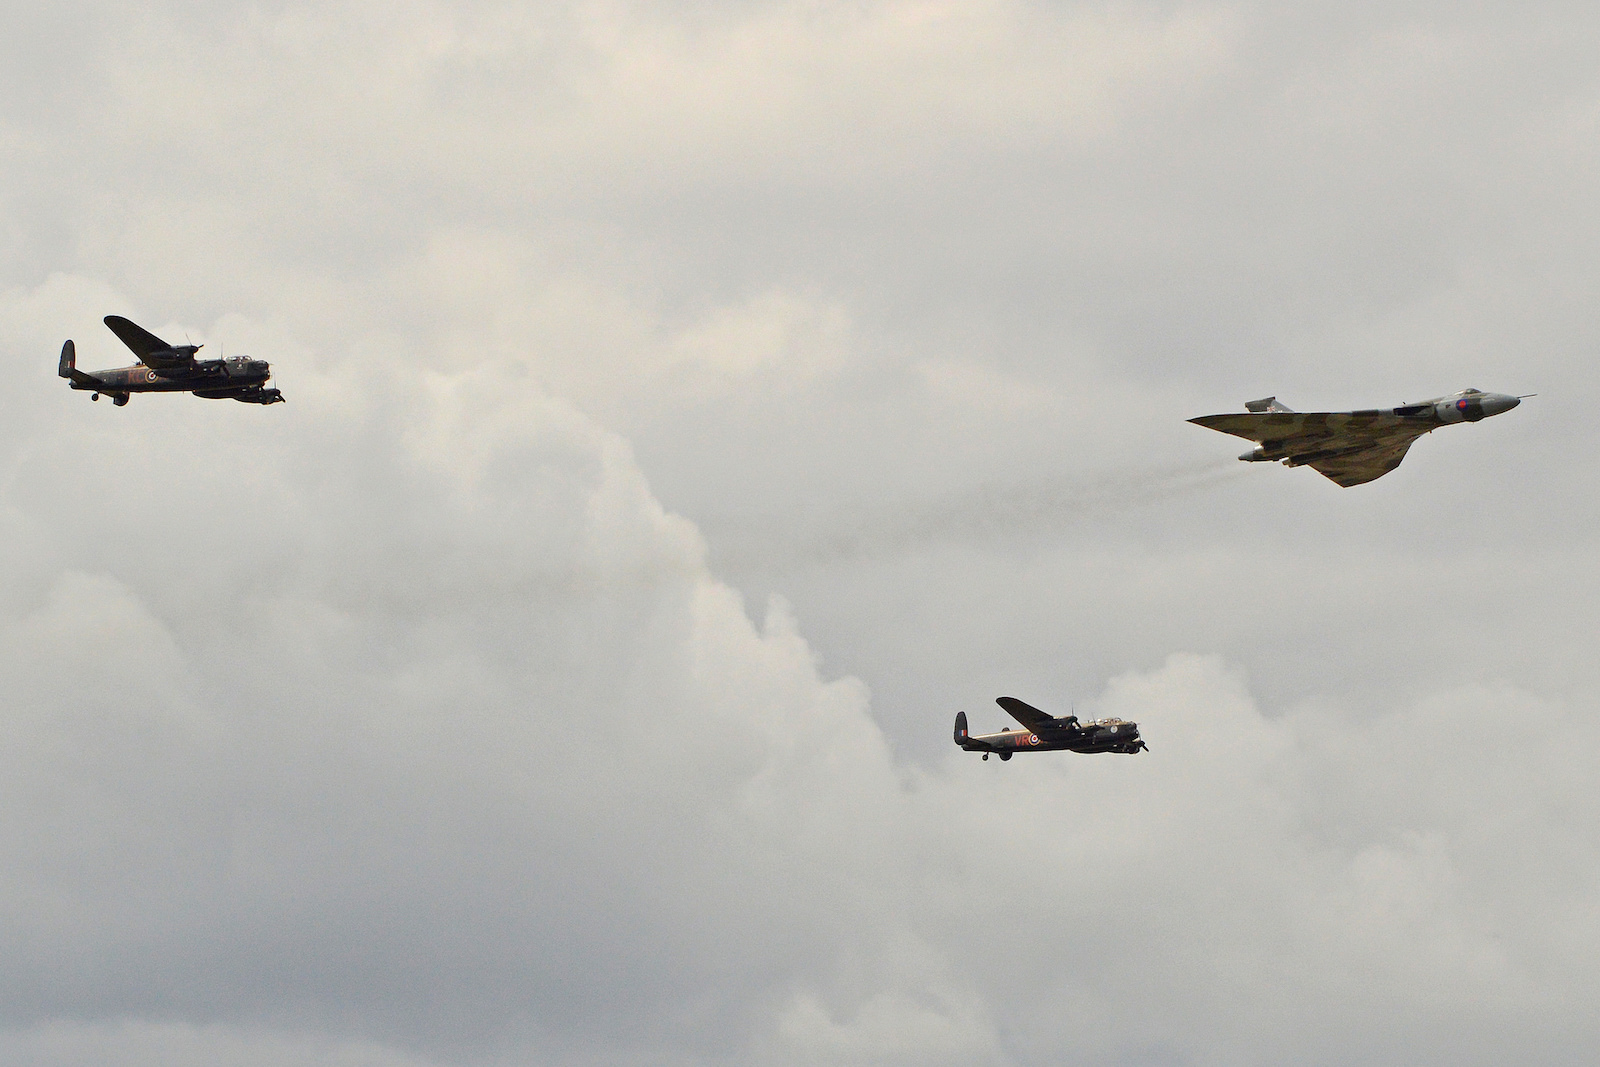 Vulcan & two Lancasters formation ©2014 Alan Wilson